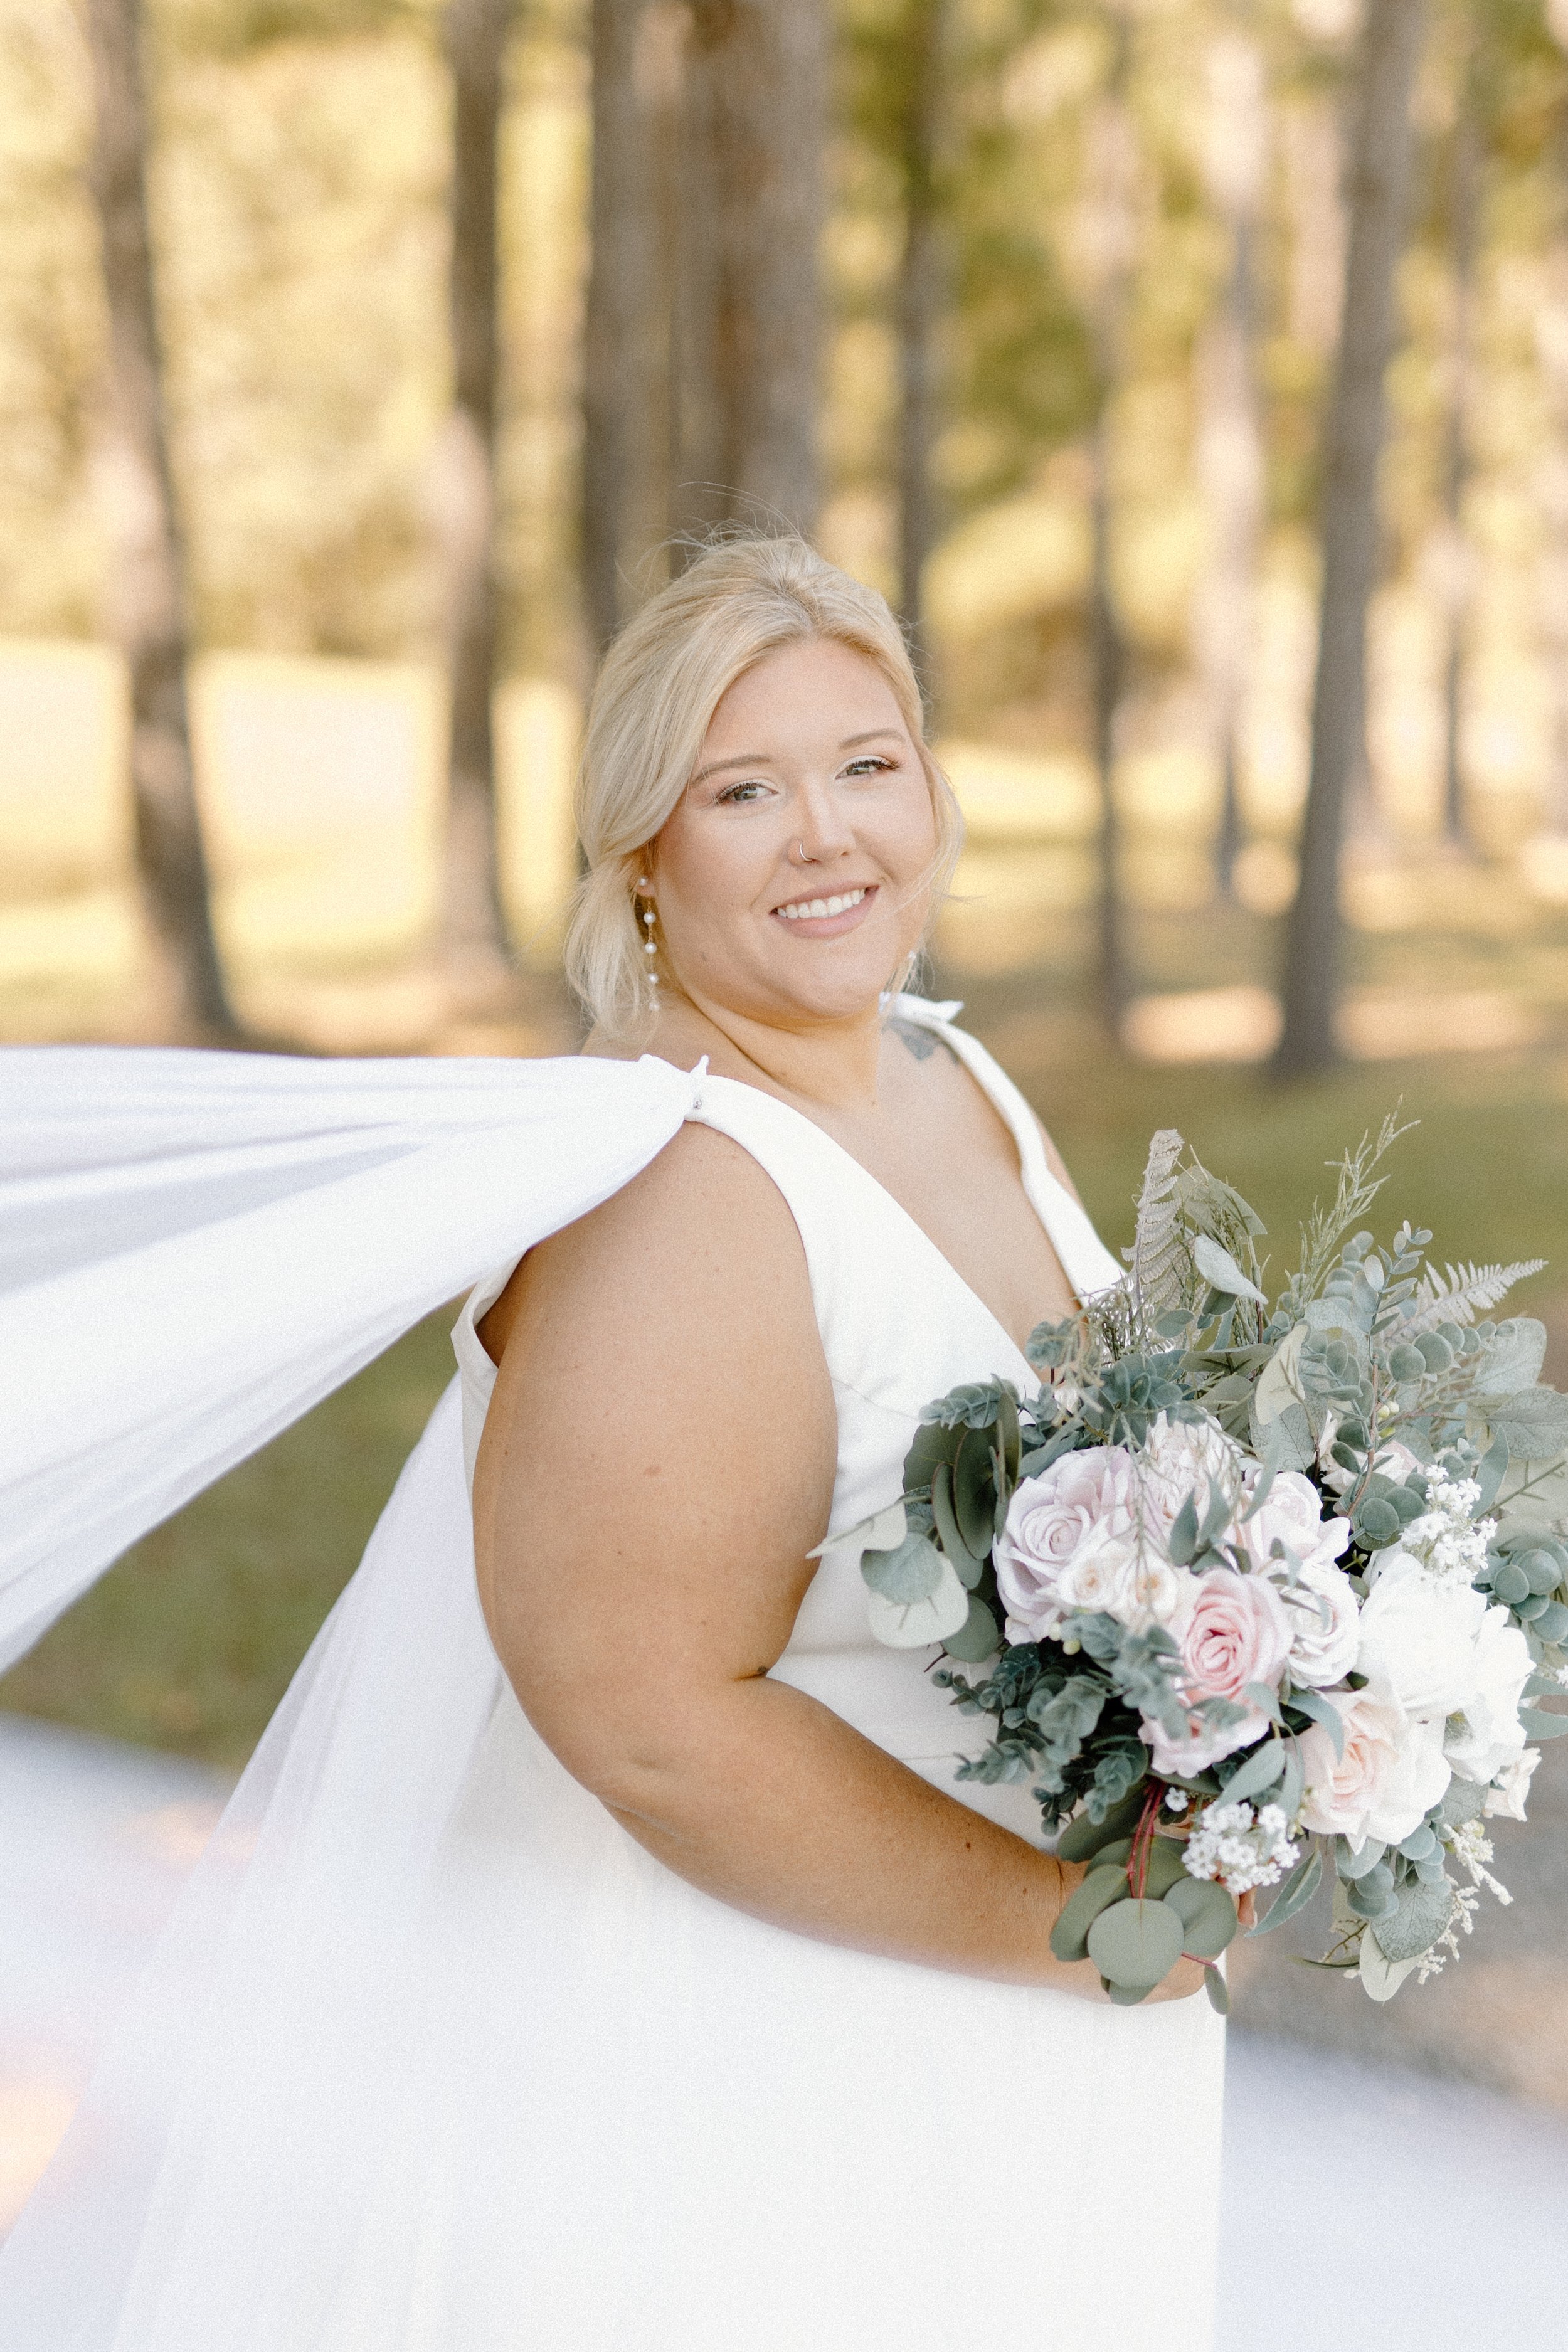 ivory-and-beau-blog-down-for-the-gown-ashley-real-bride-made-with-love-bridal-wedding-dress-bridal-gown-wedding-gown-southern-bride-savannah-bridal-shop-ivory-and-beau-bride-savannah-georgia-MY5A7030.jpg